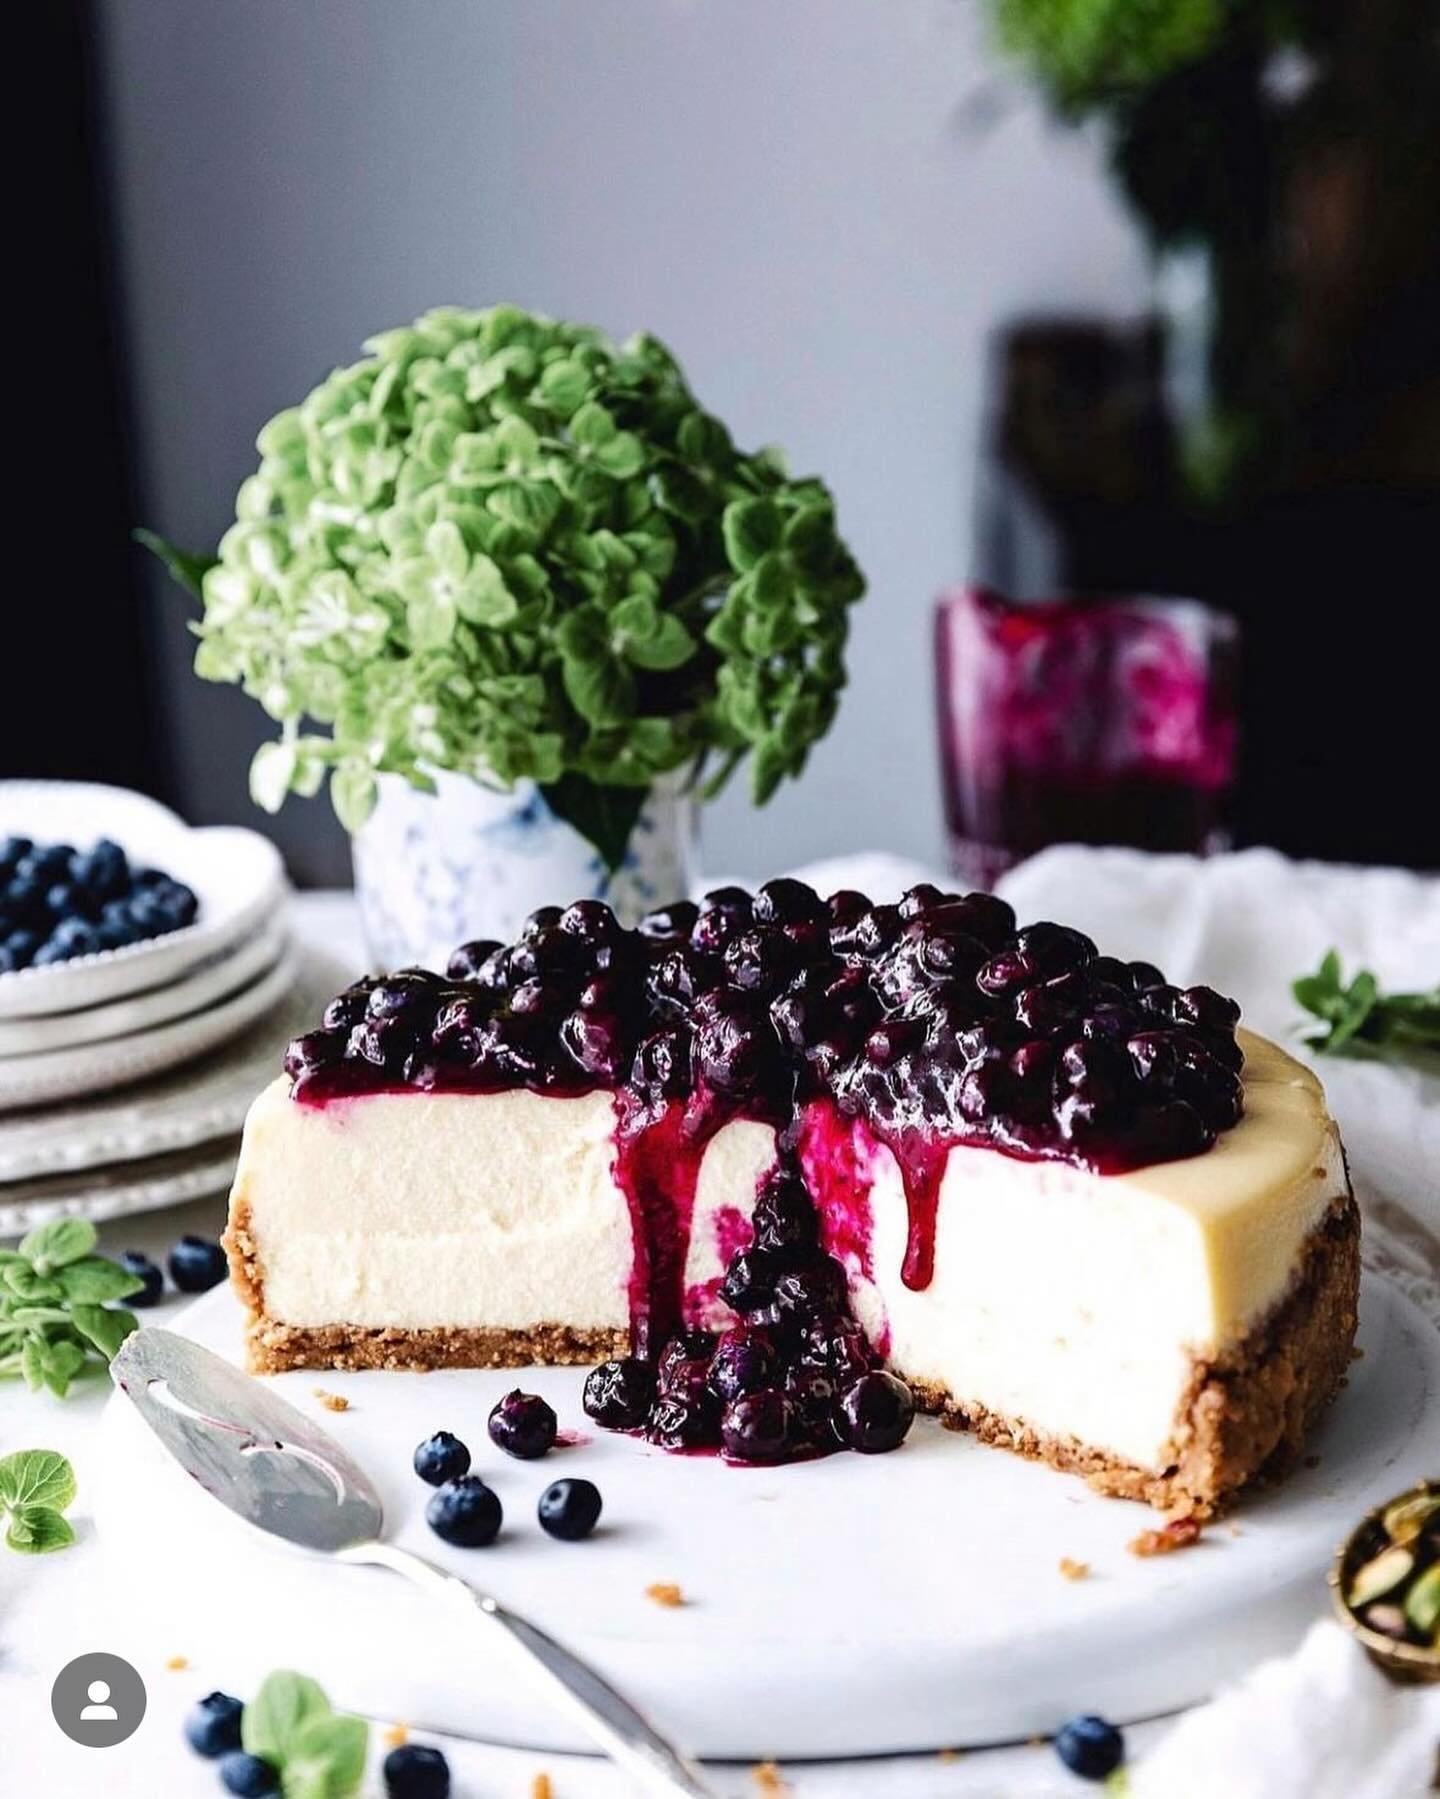 Classic Blueberry Cheesecake! 🫐

If only you could taste for yourself how creamy, luscious and velvety my classic cheesecake is, you would absolutely get why is so beloved on my website! Made from scratch from crust to bottom, totally make ahead (ac